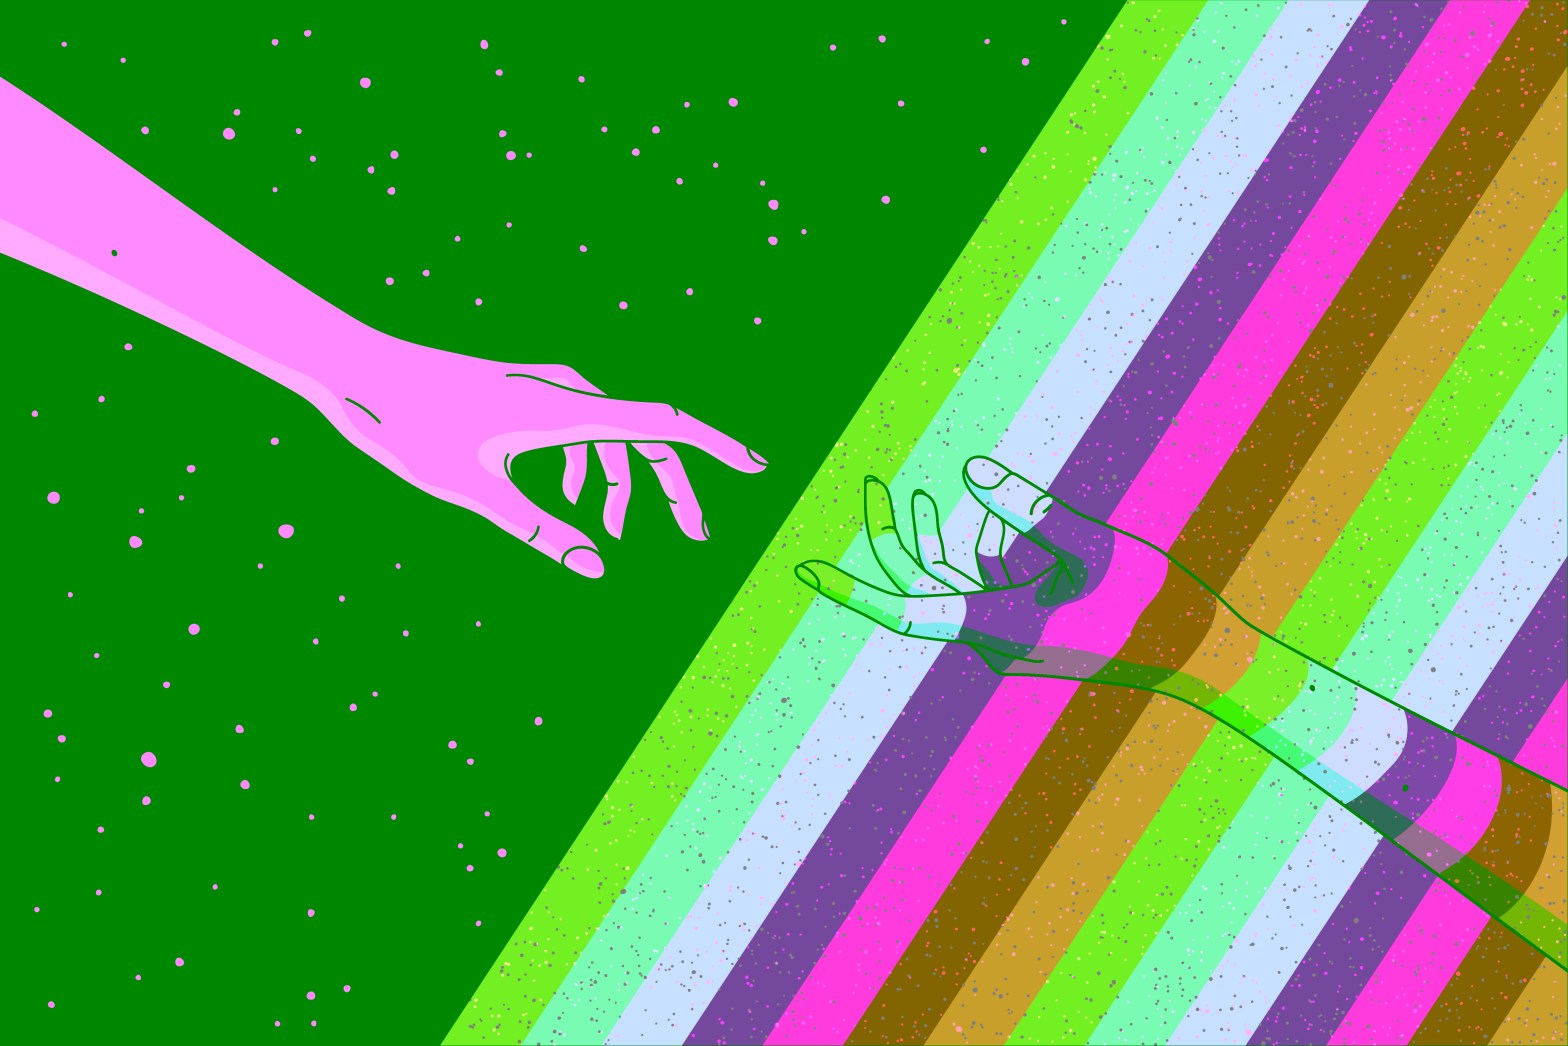 Hands reaching toward each other. One hand is in rainbow spectrum. The other hand is in starry space.